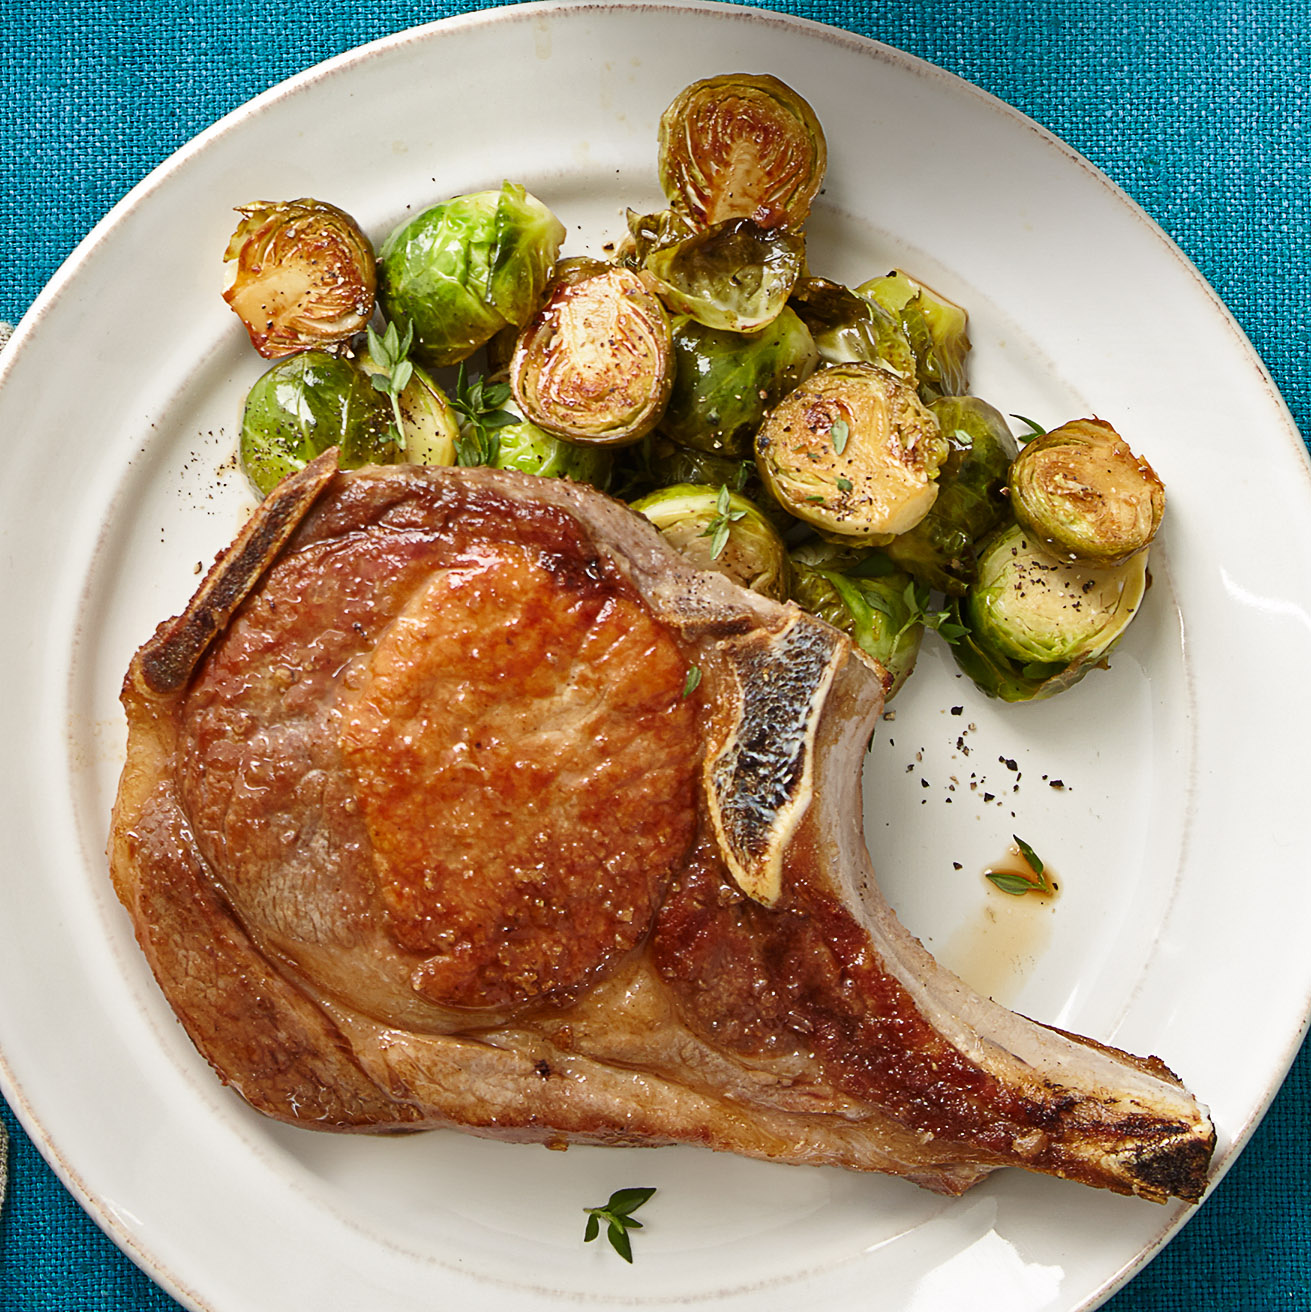 Pork Chops & Cider-Braised Brussels Sprouts